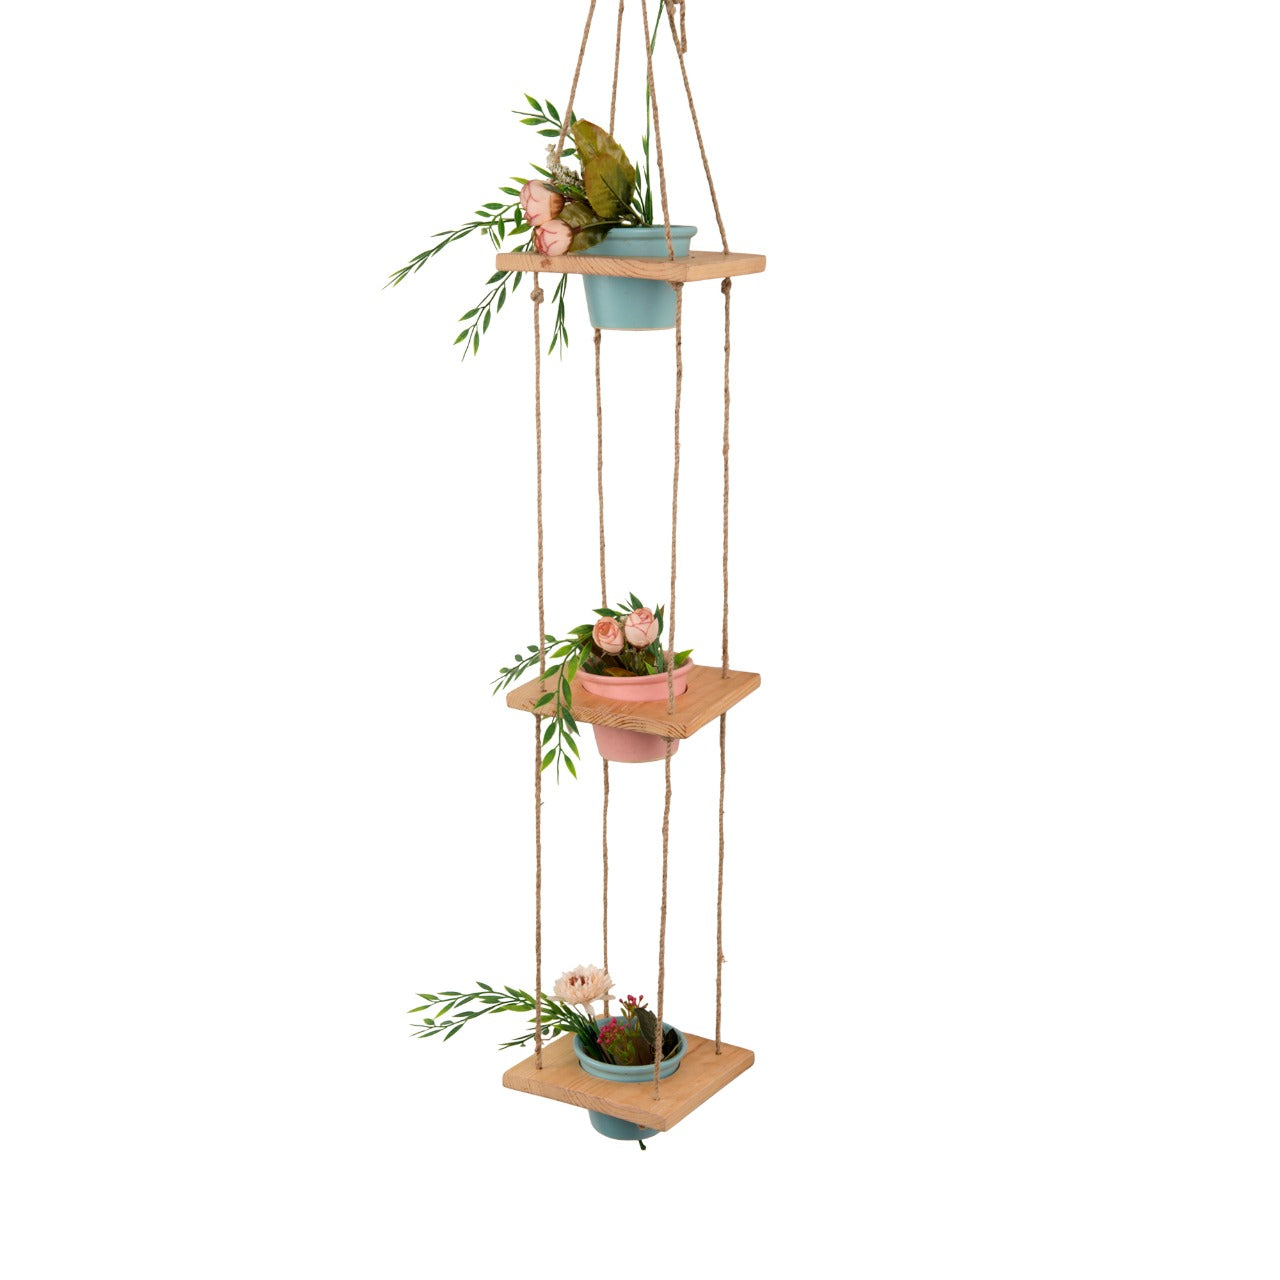 Hanging Wooden Planters with Ceramic Pots